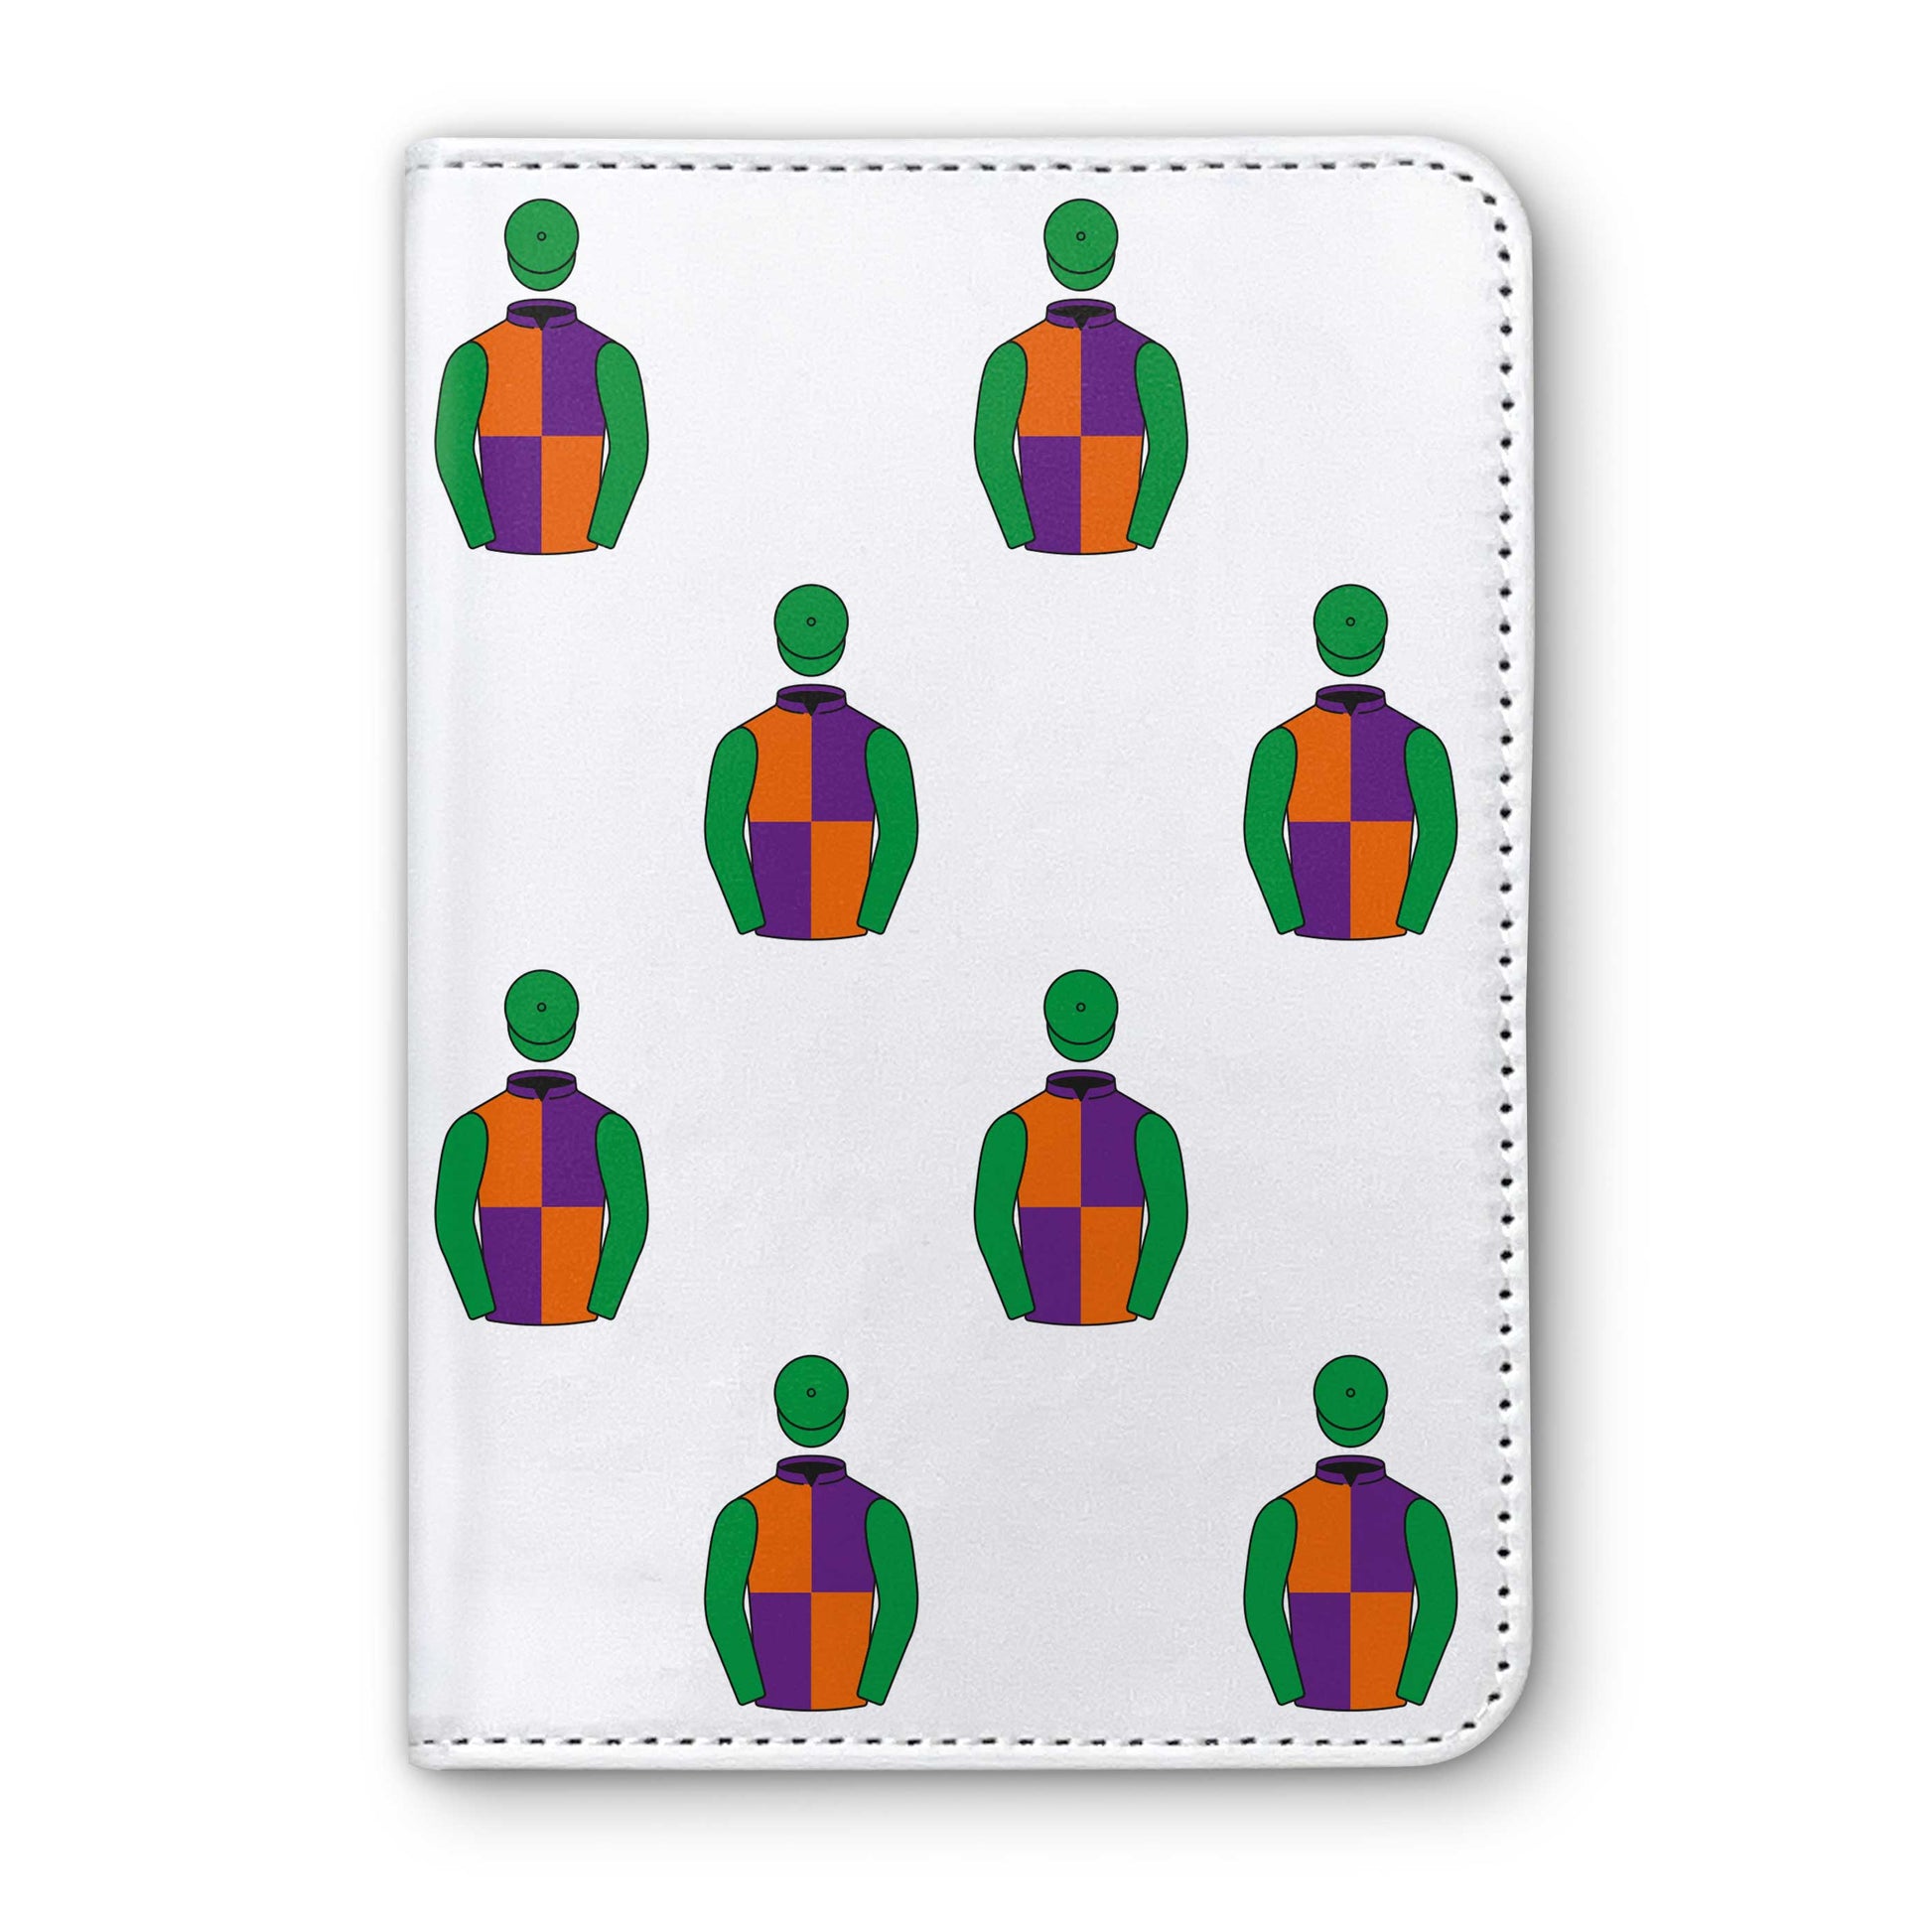 T W Morley Horse Racing Passport Holder - Hacked Up Horse Racing Gifts